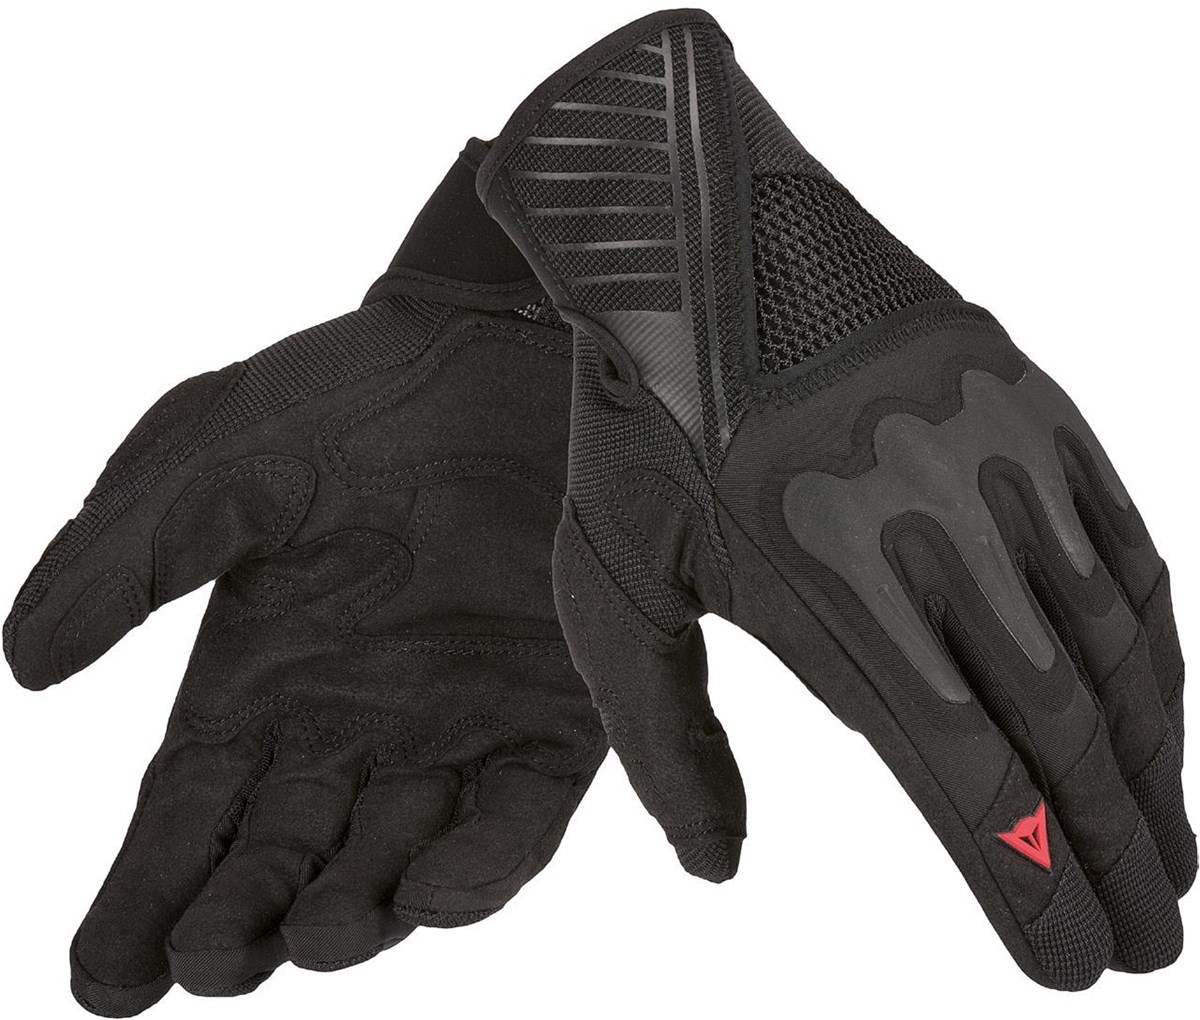 Dainese Atrax Gloves product image